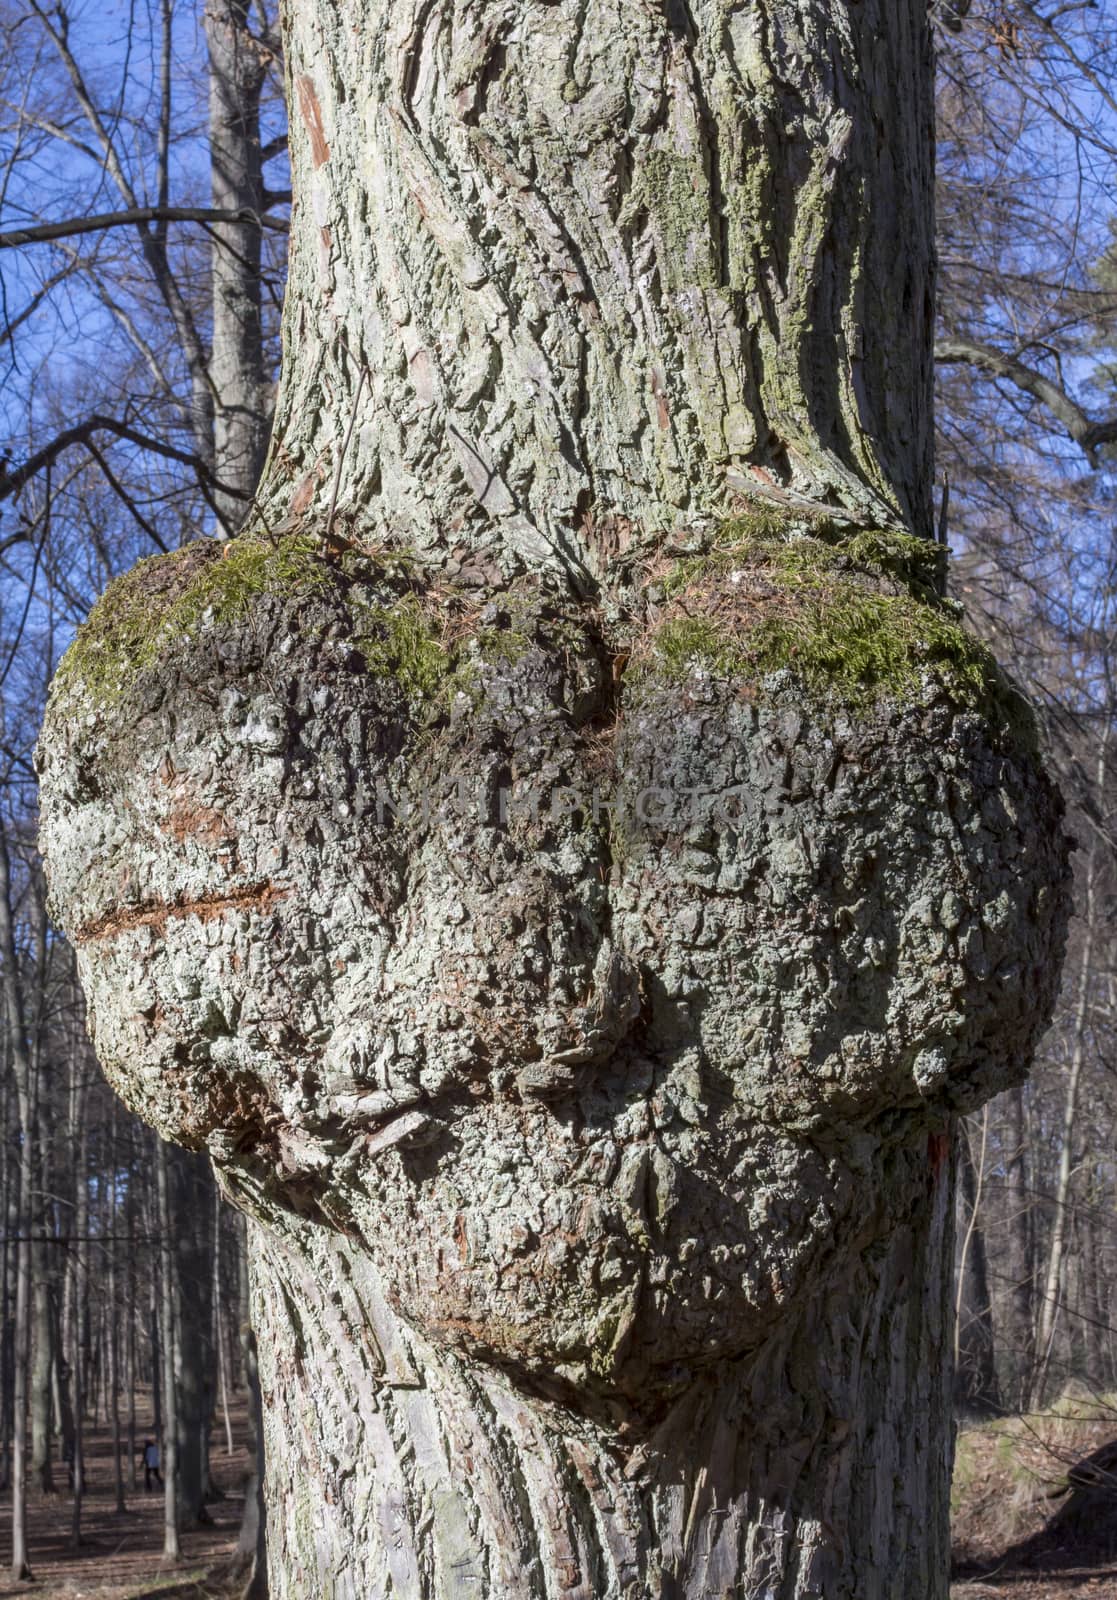 Heart shaped growth on tree. Stockholm, Sweden in March.